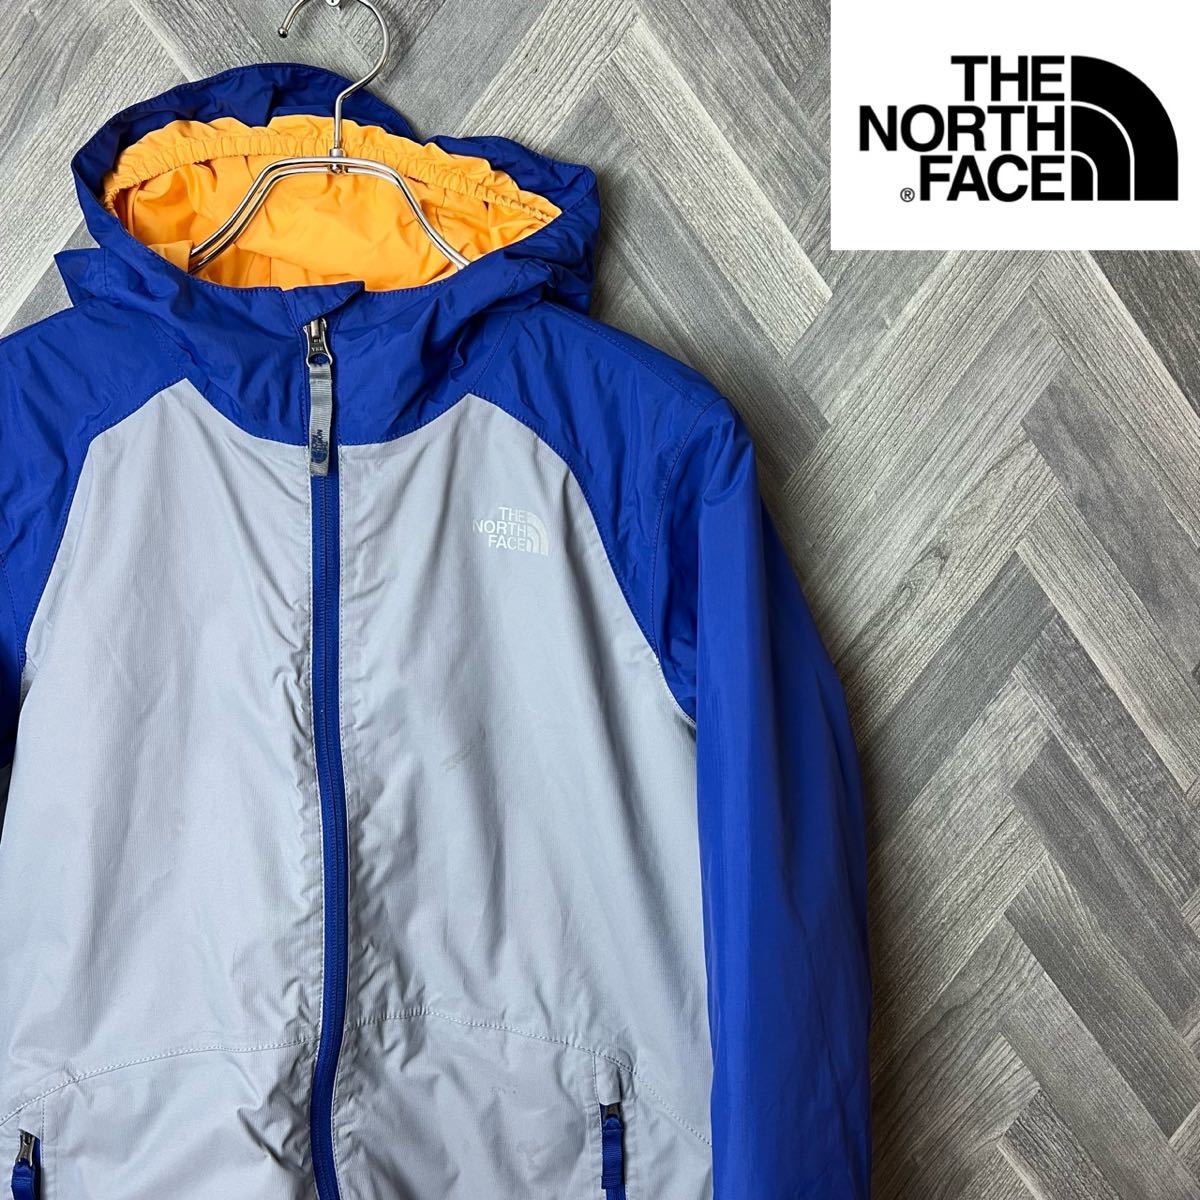 THE NORTH FACE HyVent USA製 ボーイズＬサイズ｜PayPayフリマ